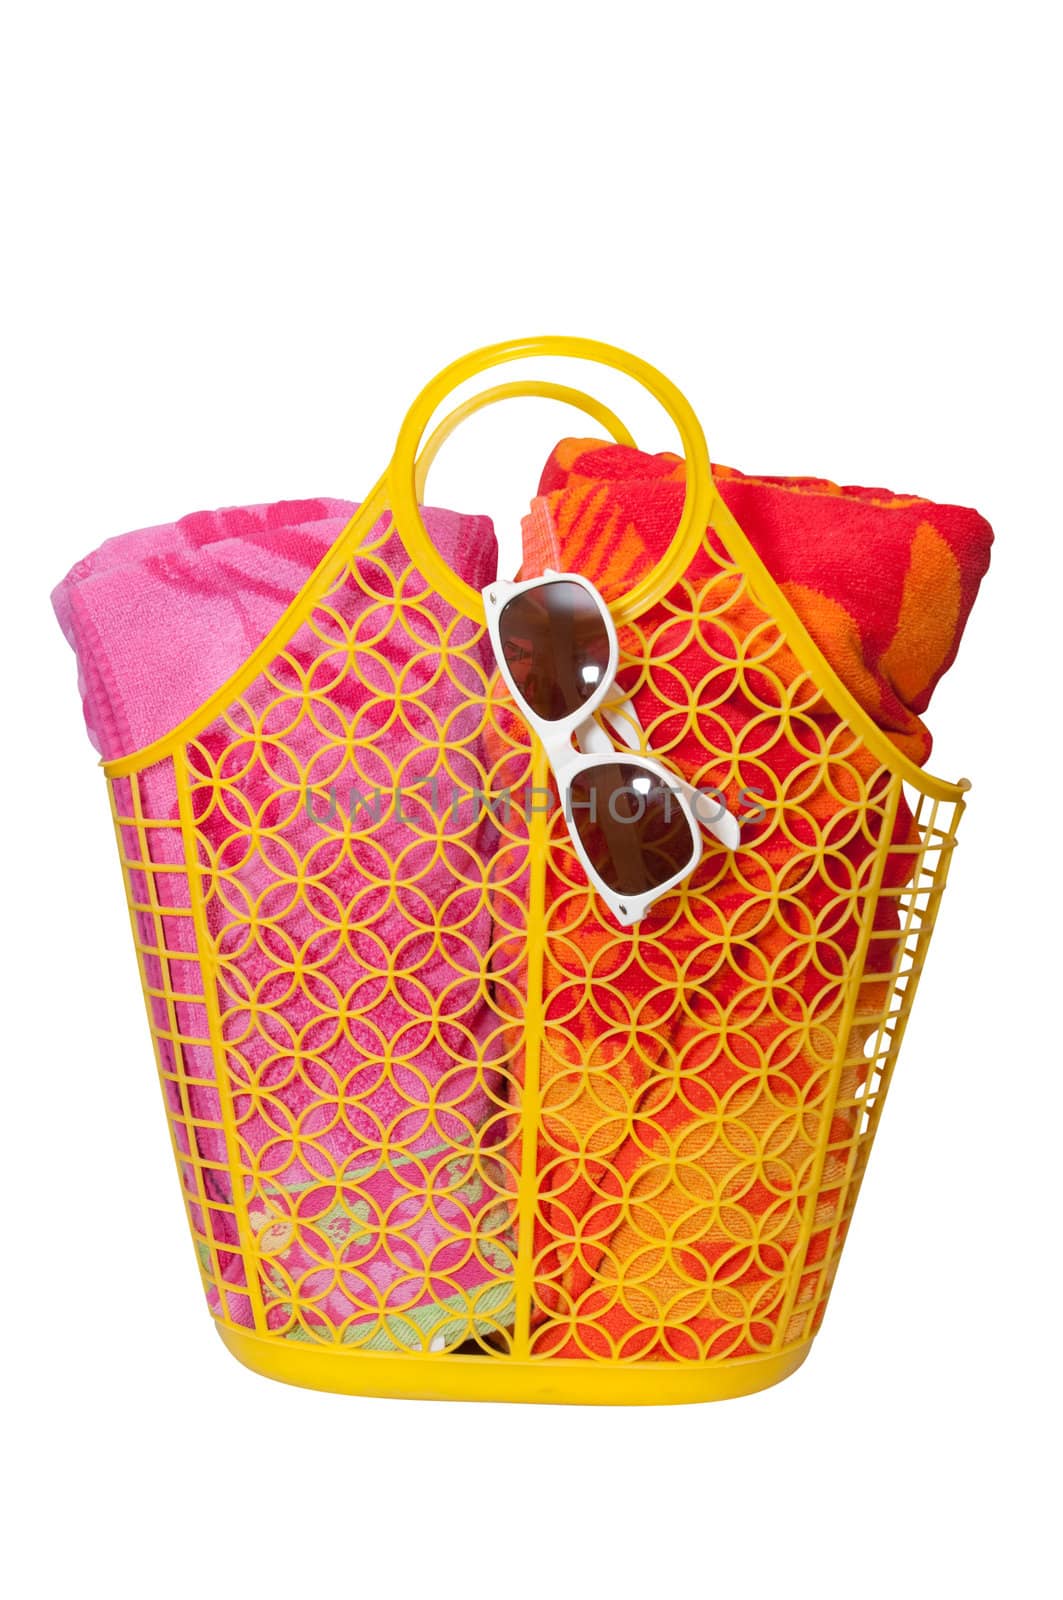 Beach Bag, Towels, and Sunglasses by dehooks